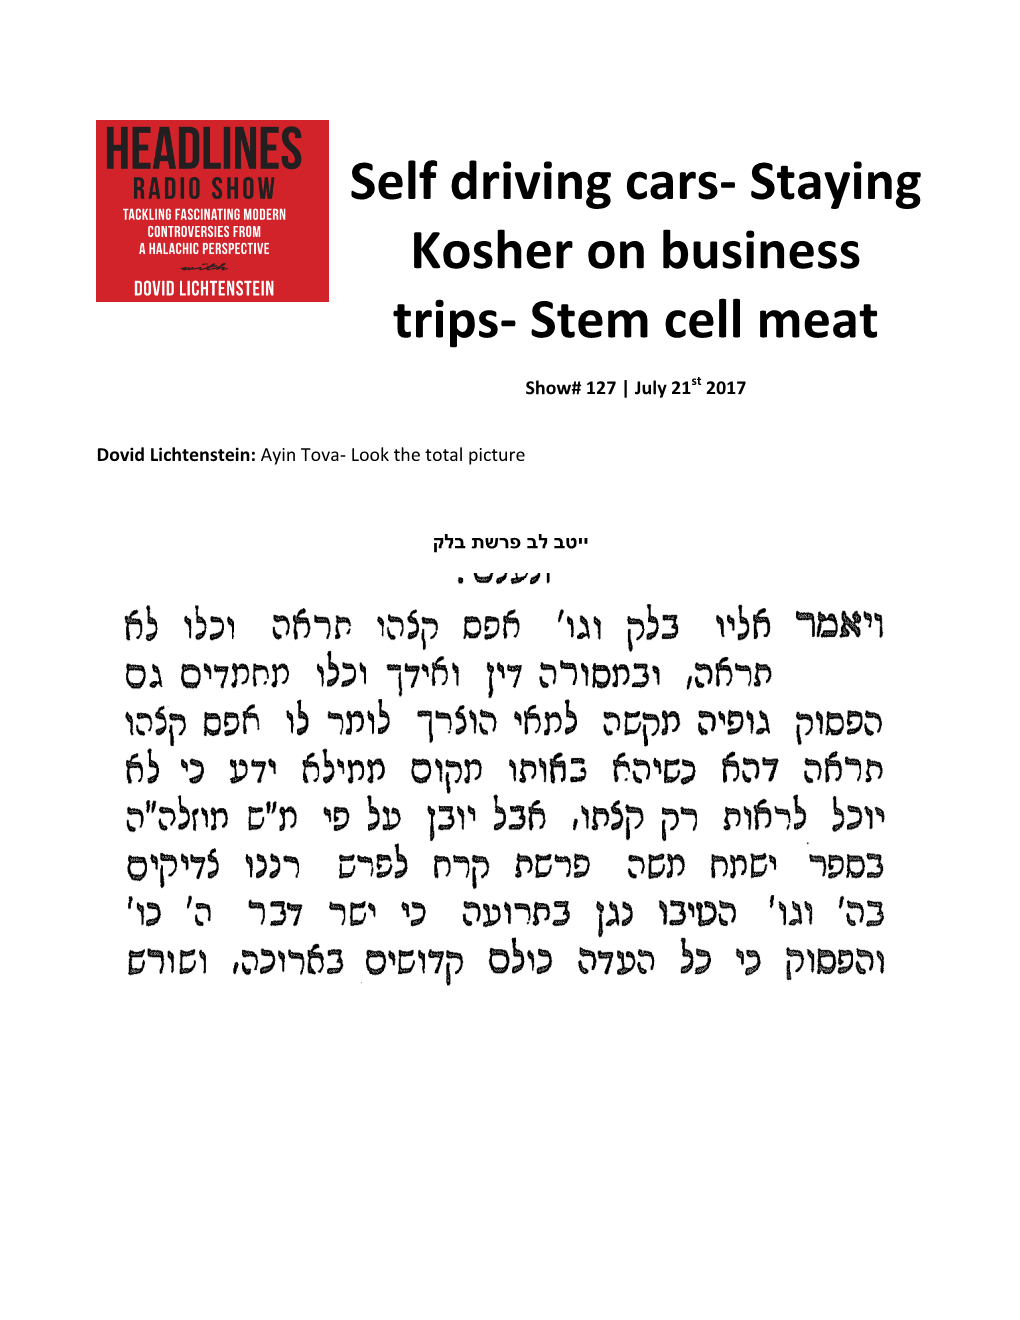 Stem Cell Meat